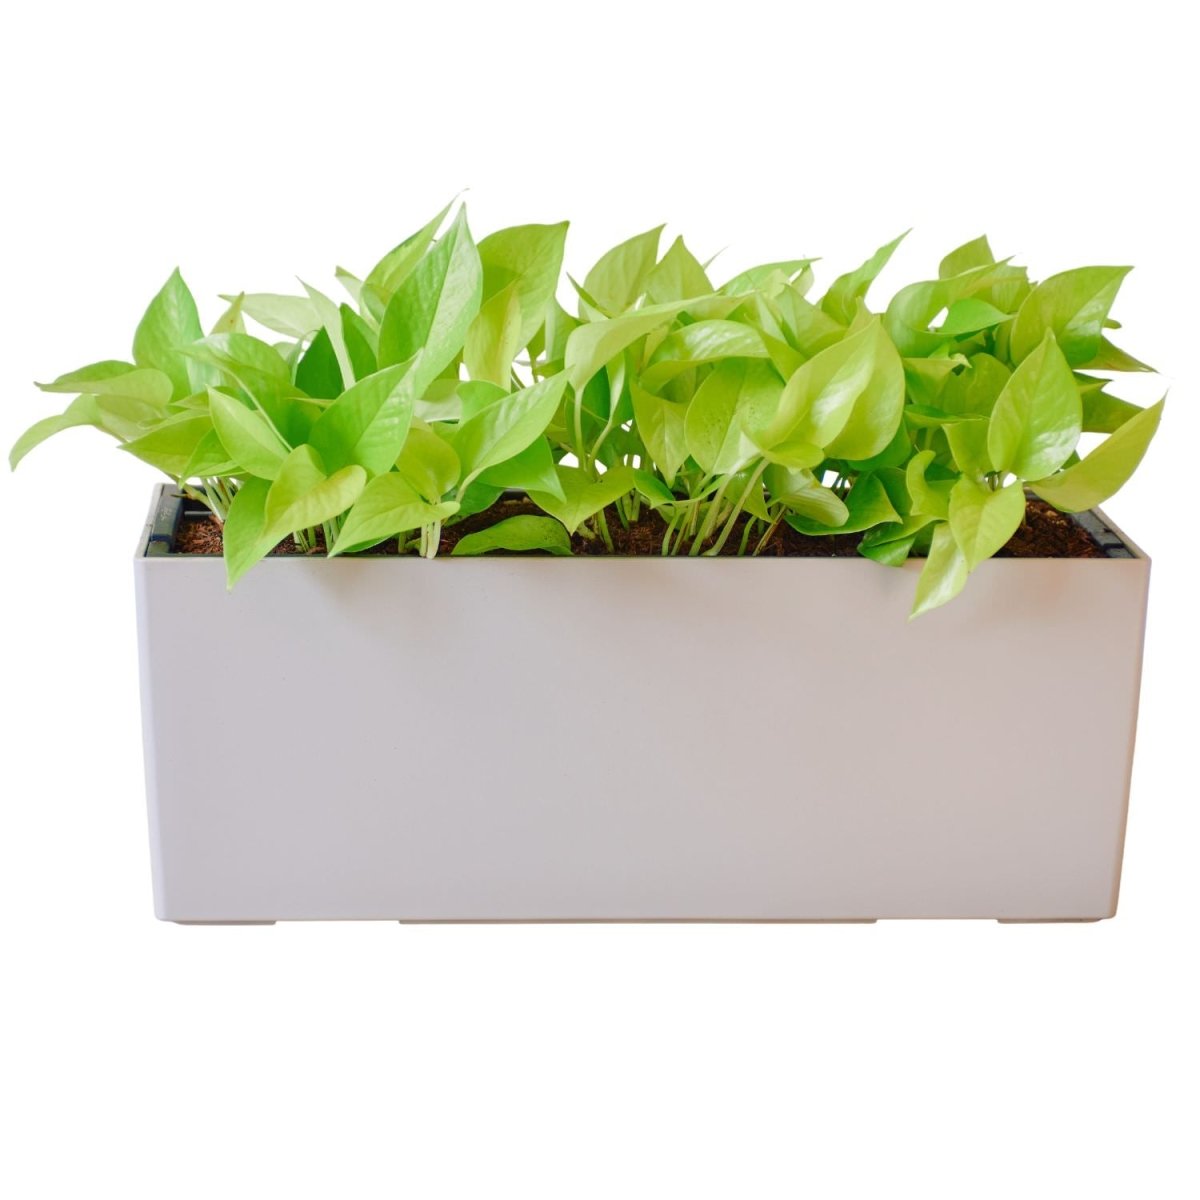 Pothos Neon Potted In Lechuza Balconera Planter - Sand Brown - My City Plants